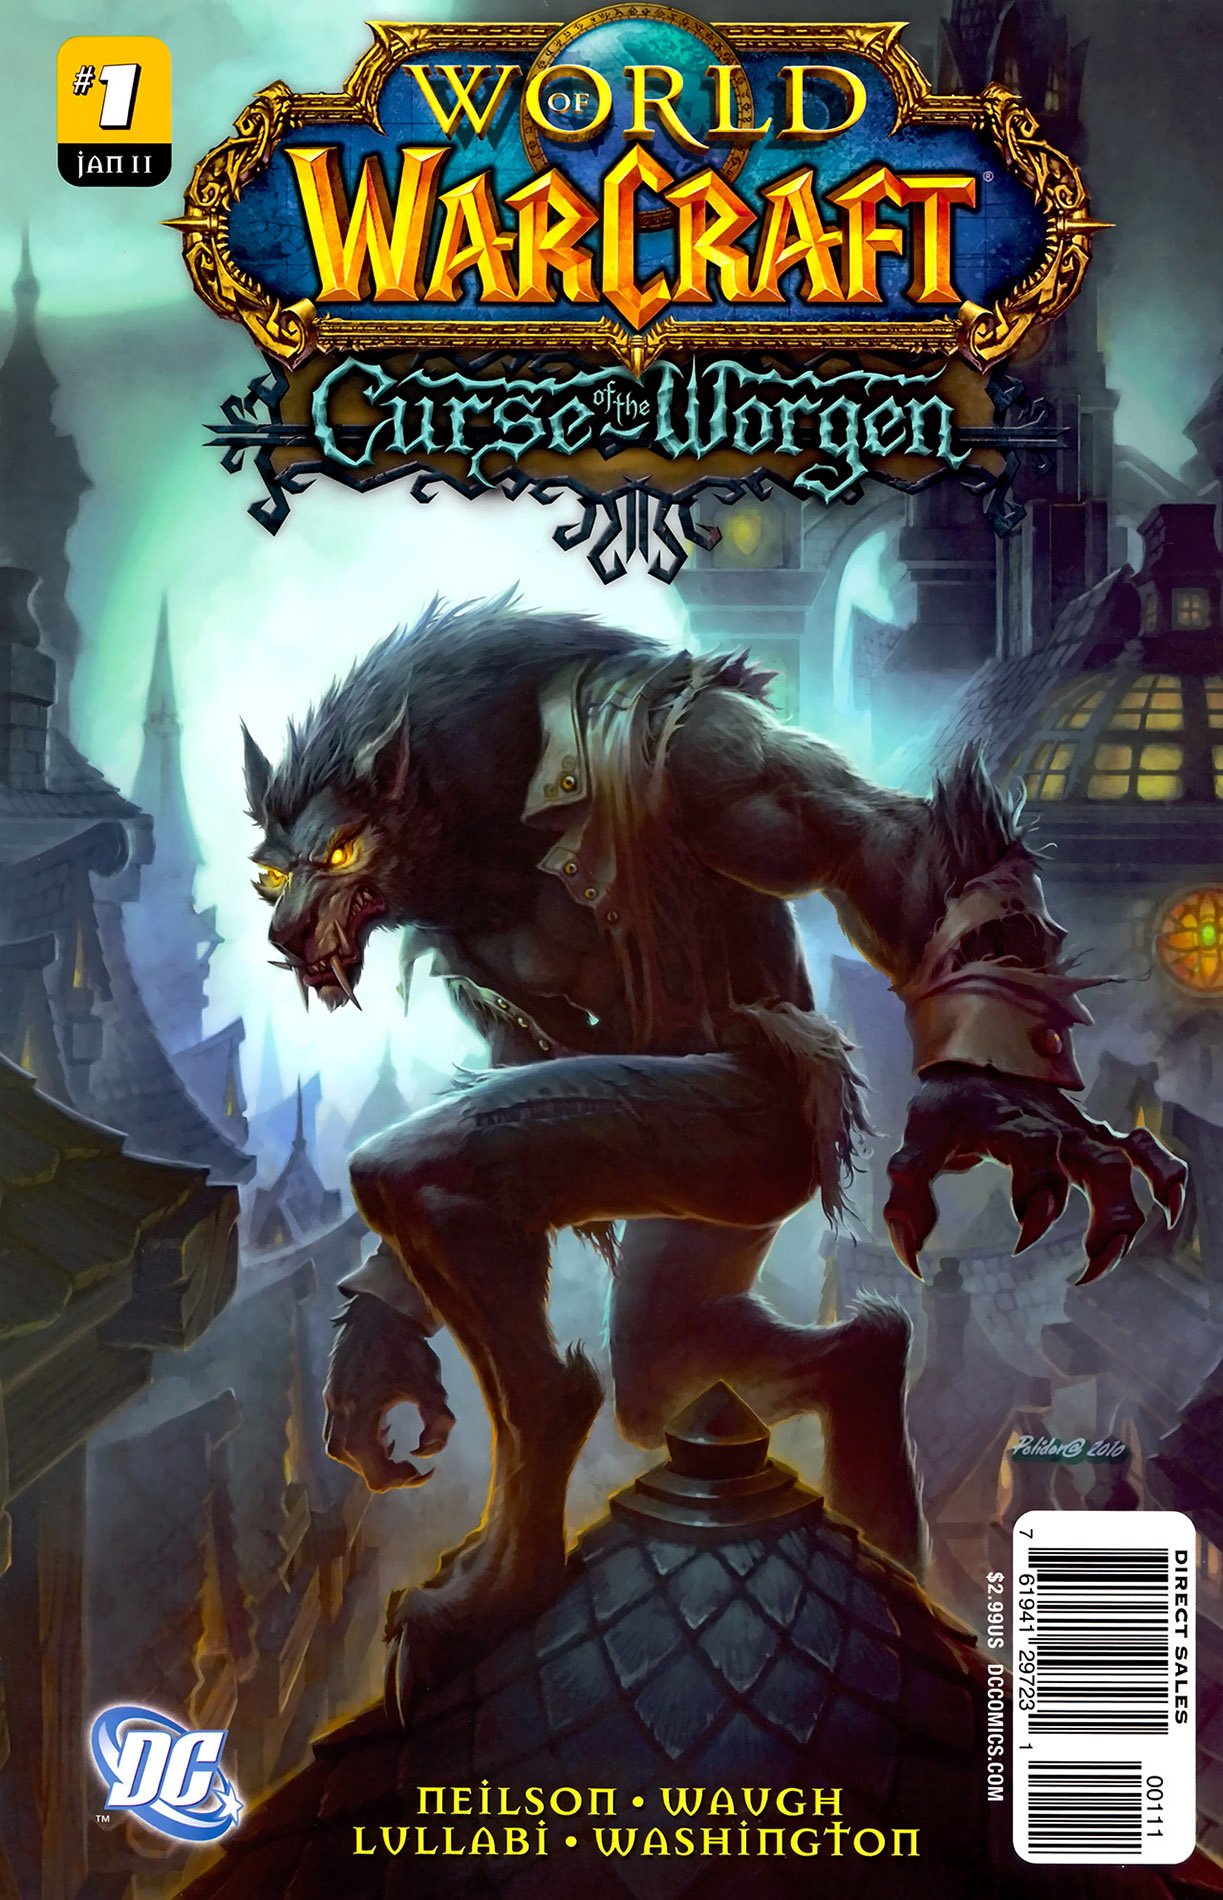 World of Warcraft - Curse of the Worgen 01  (January 2011)